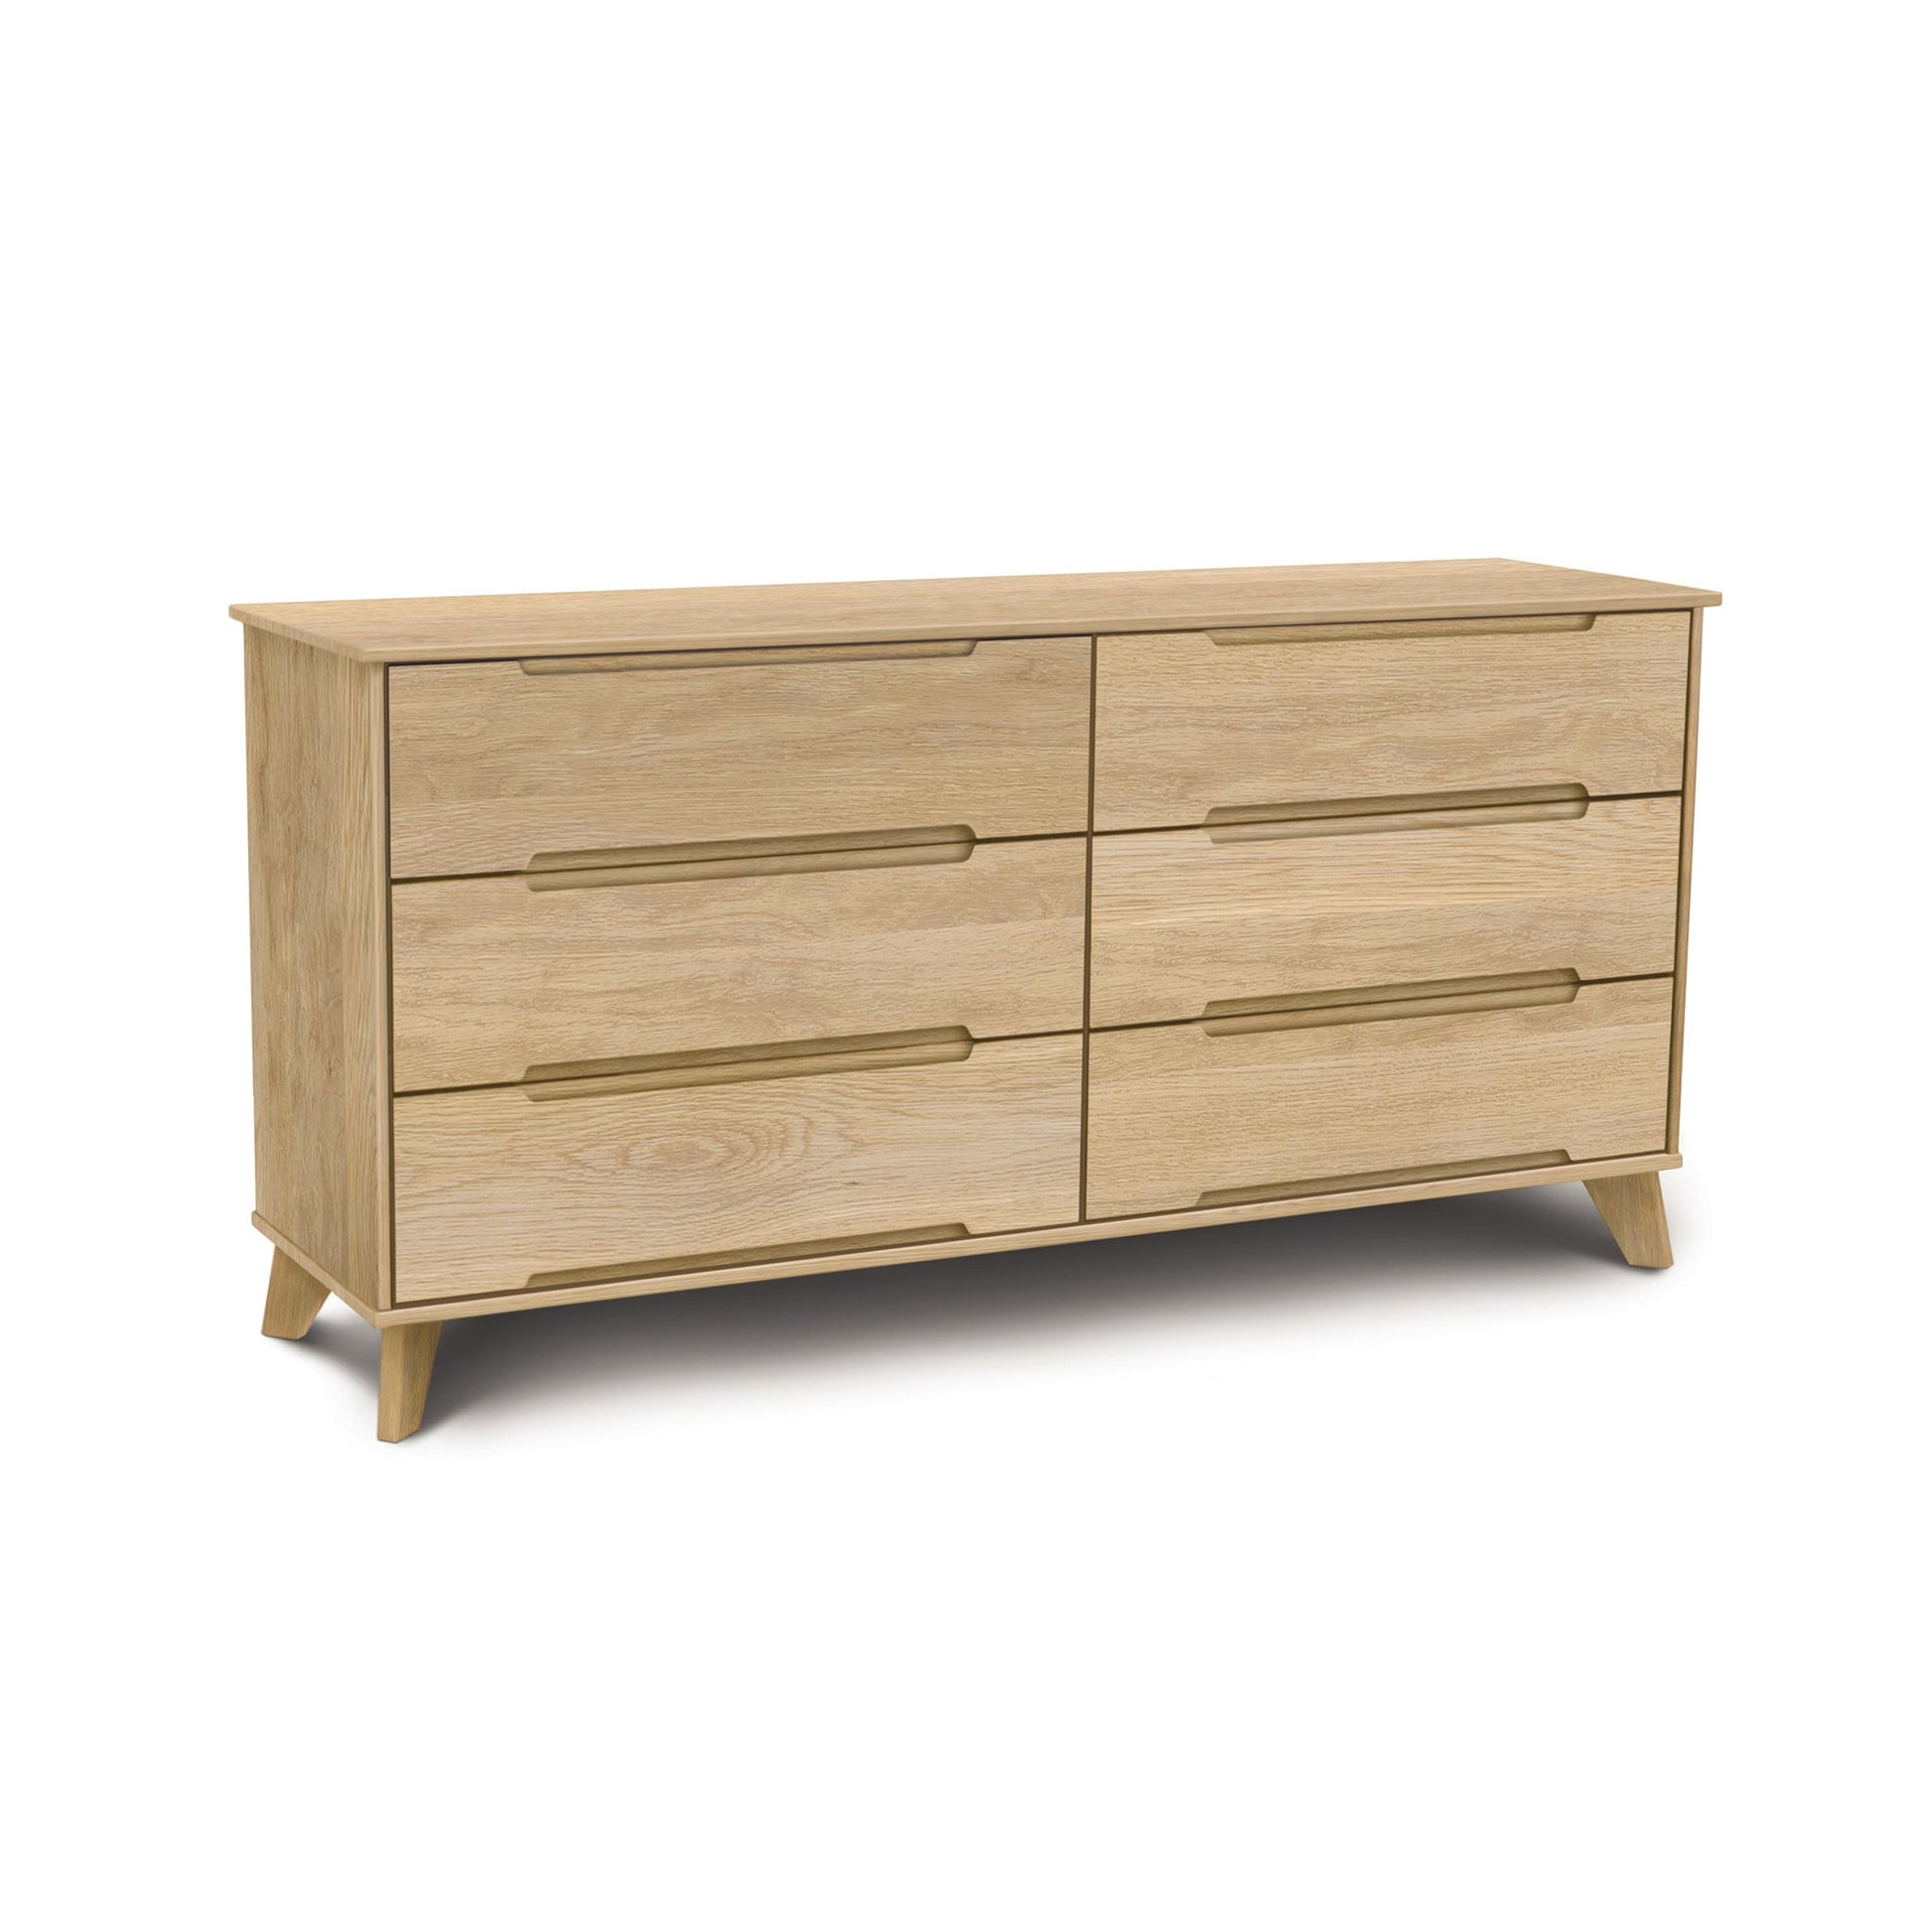 A wooden dresser with drawers on a white background.